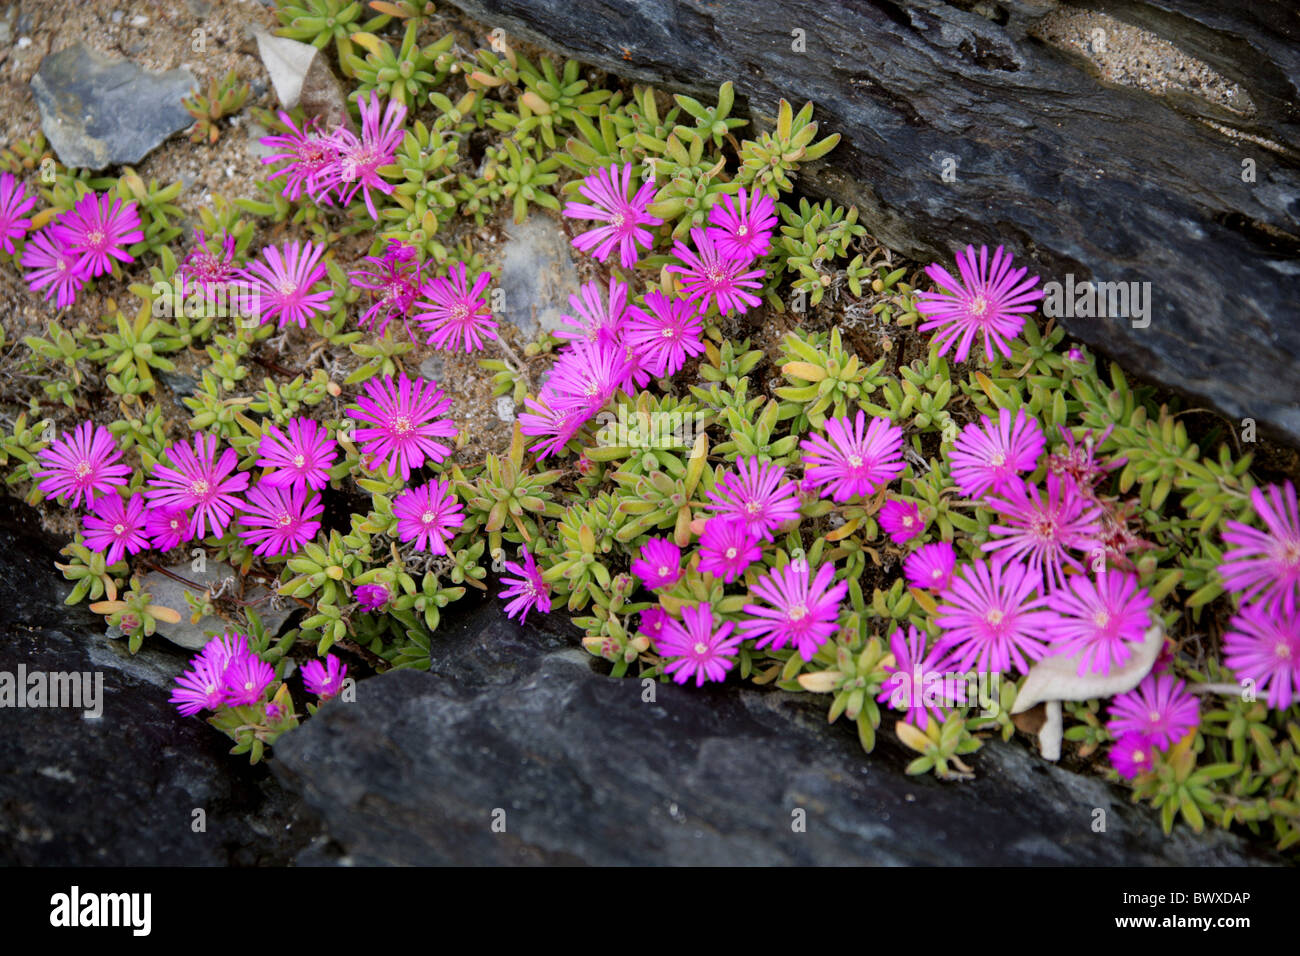 Pink Ice Plants, Delosperma patersoniae, Aizoaceae, Growing on a Rocky Beach, Tsitsikamma Nature Reserve, South Africa. Stock Photo